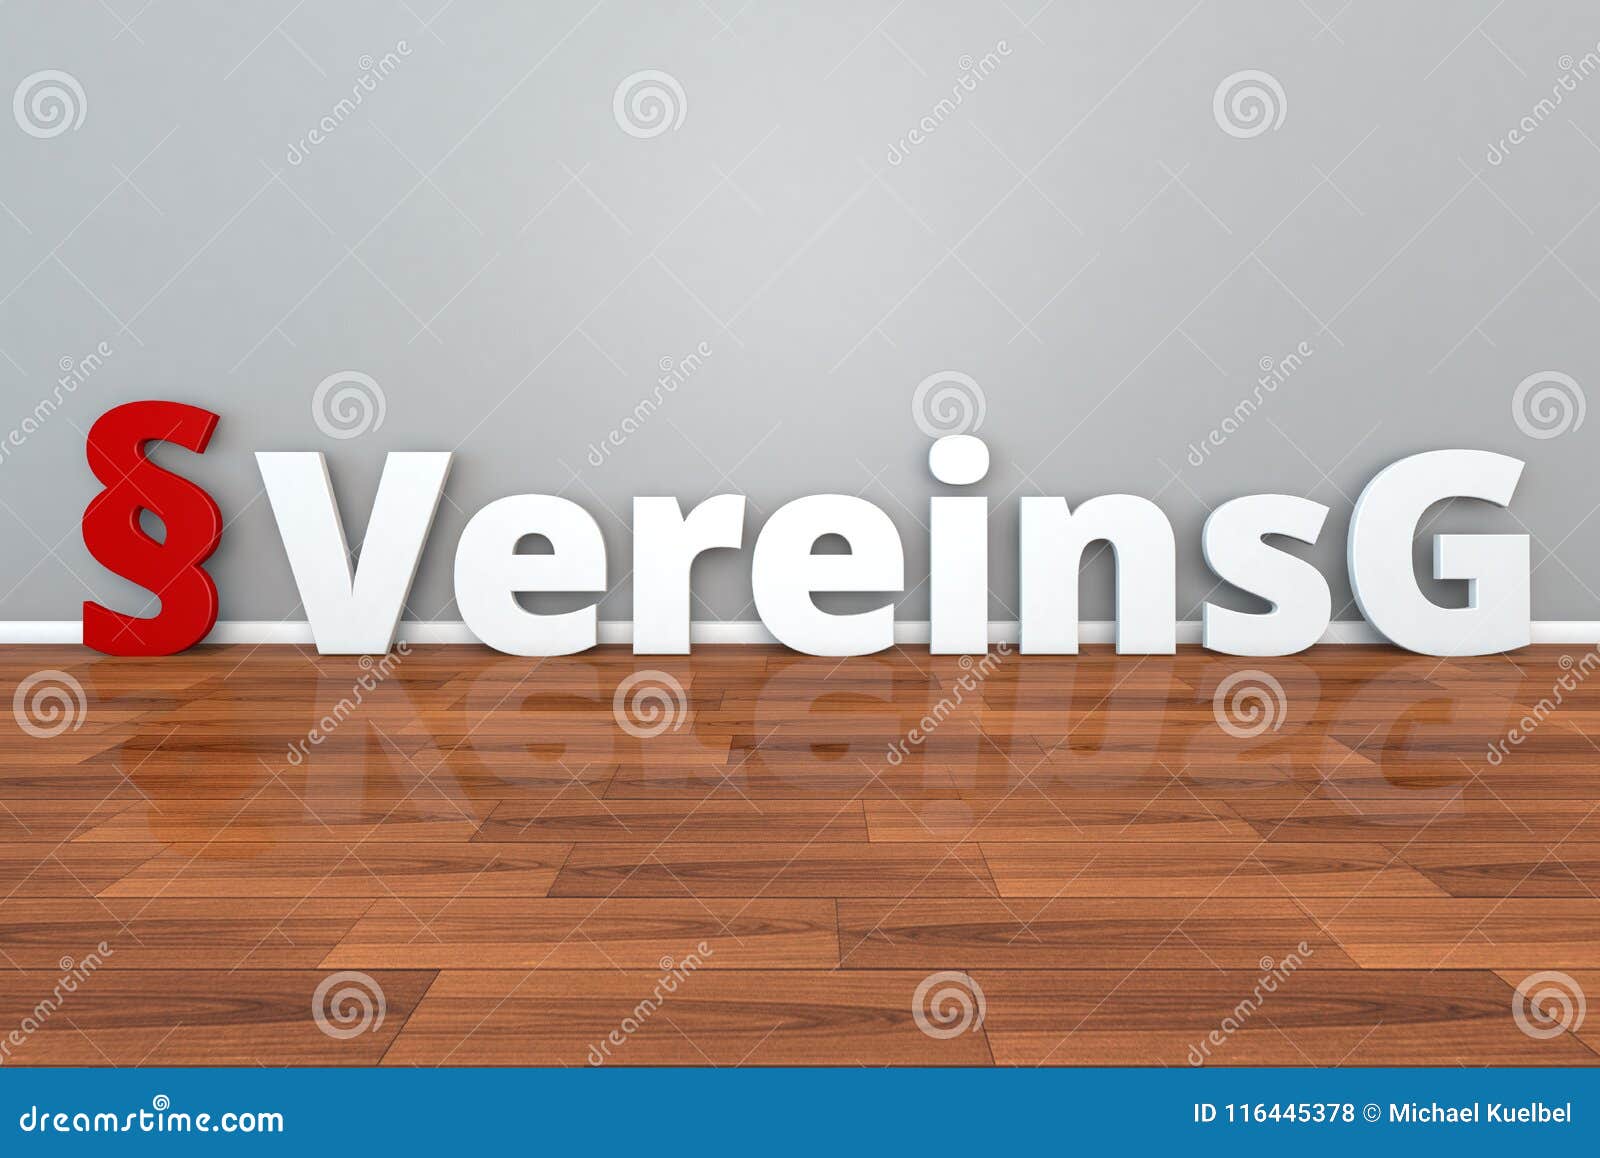 German Law Vereinsg Abbreviation For Law Governing Public